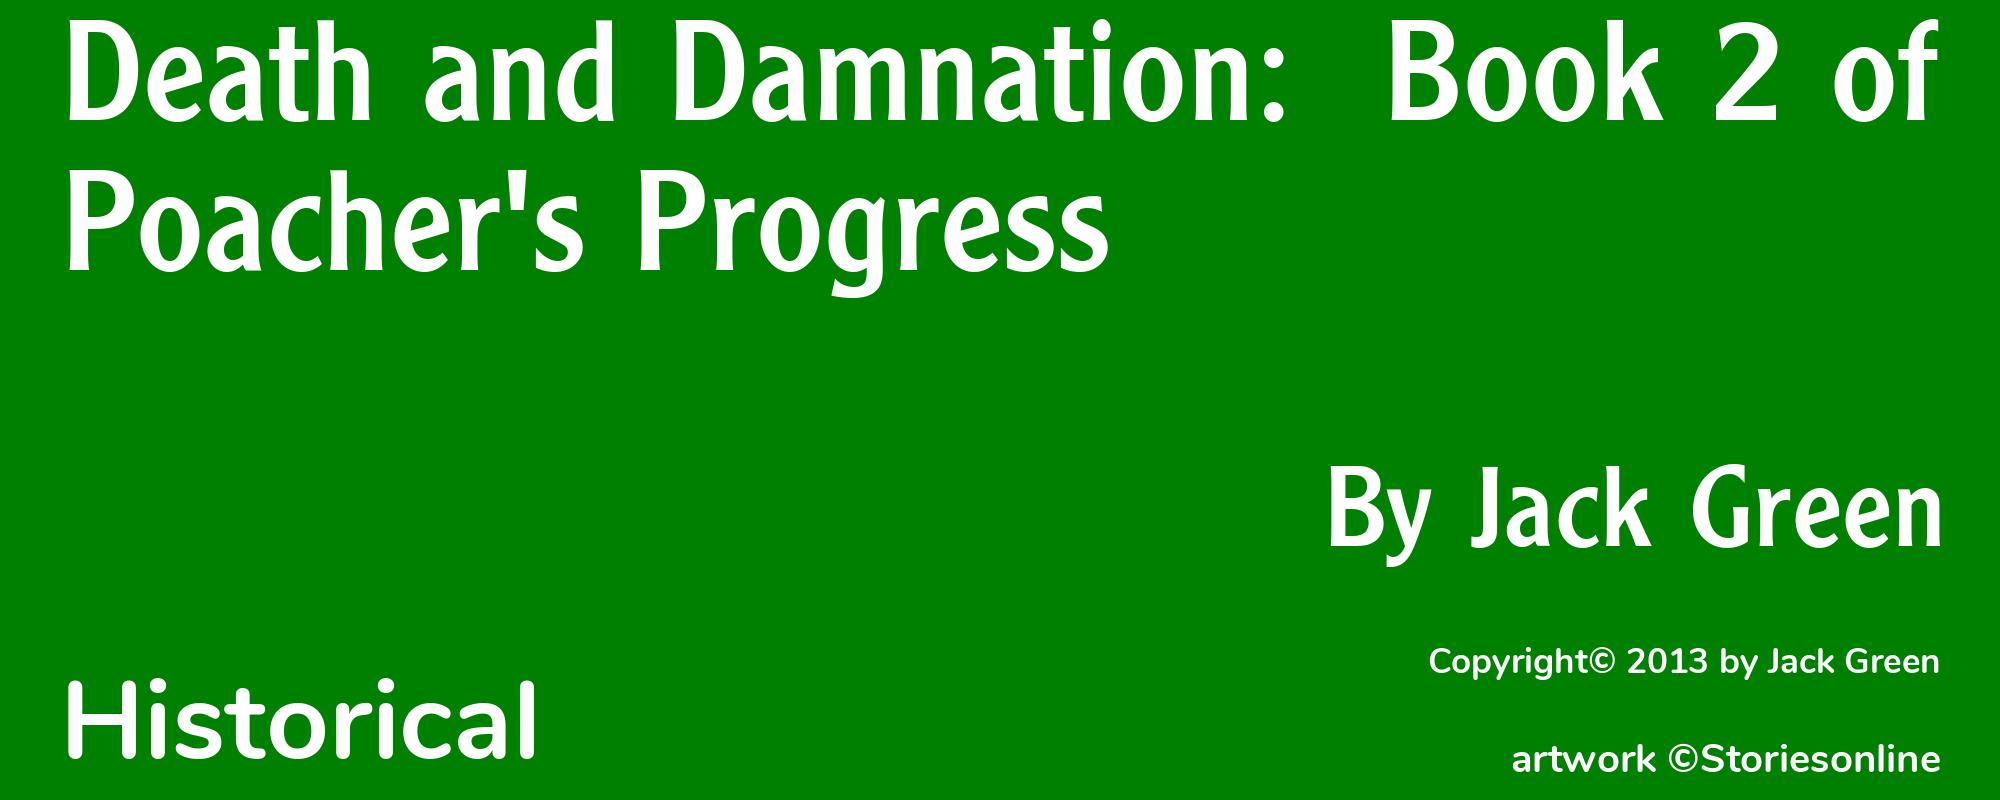 Death and Damnation:  Book 2 of Poacher's Progress - Cover